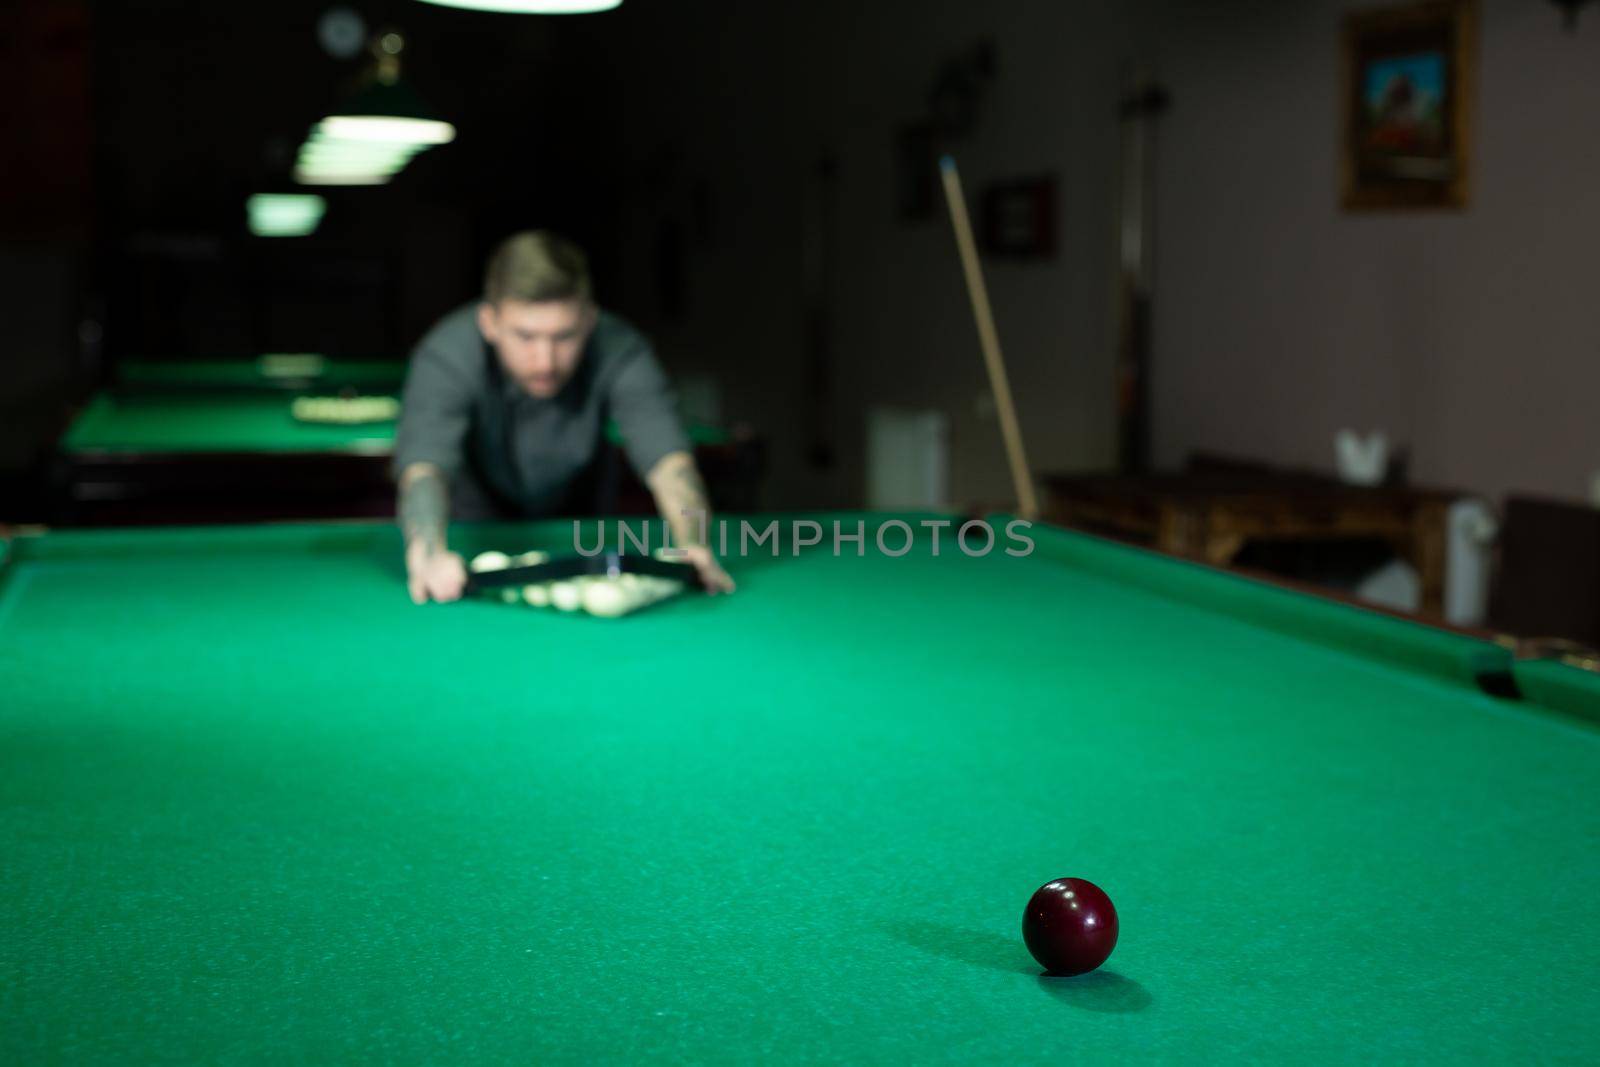 Game of billiards. The man puts the balls on the green billiard table by StudioPeace